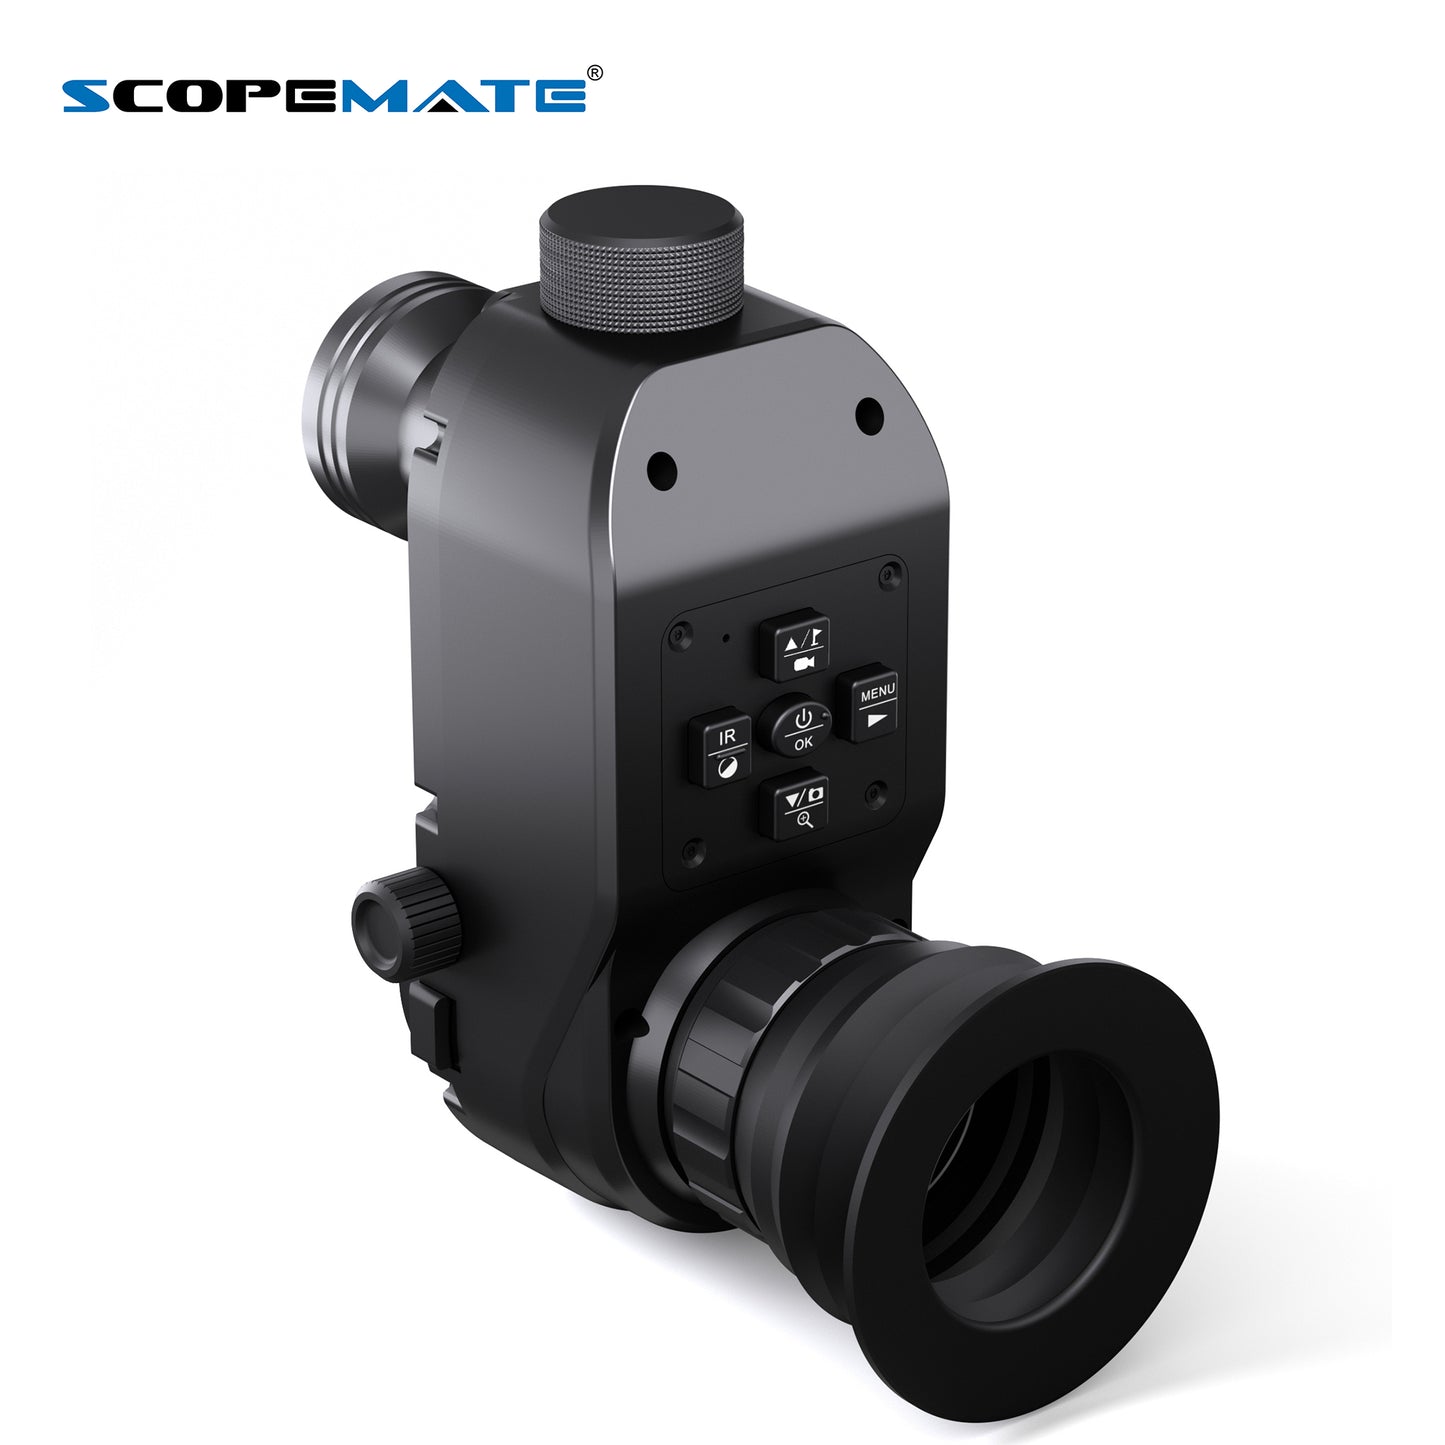 Scopemate Innovative Compact Design Digital Day and Night Vision Scope Camera NVS12